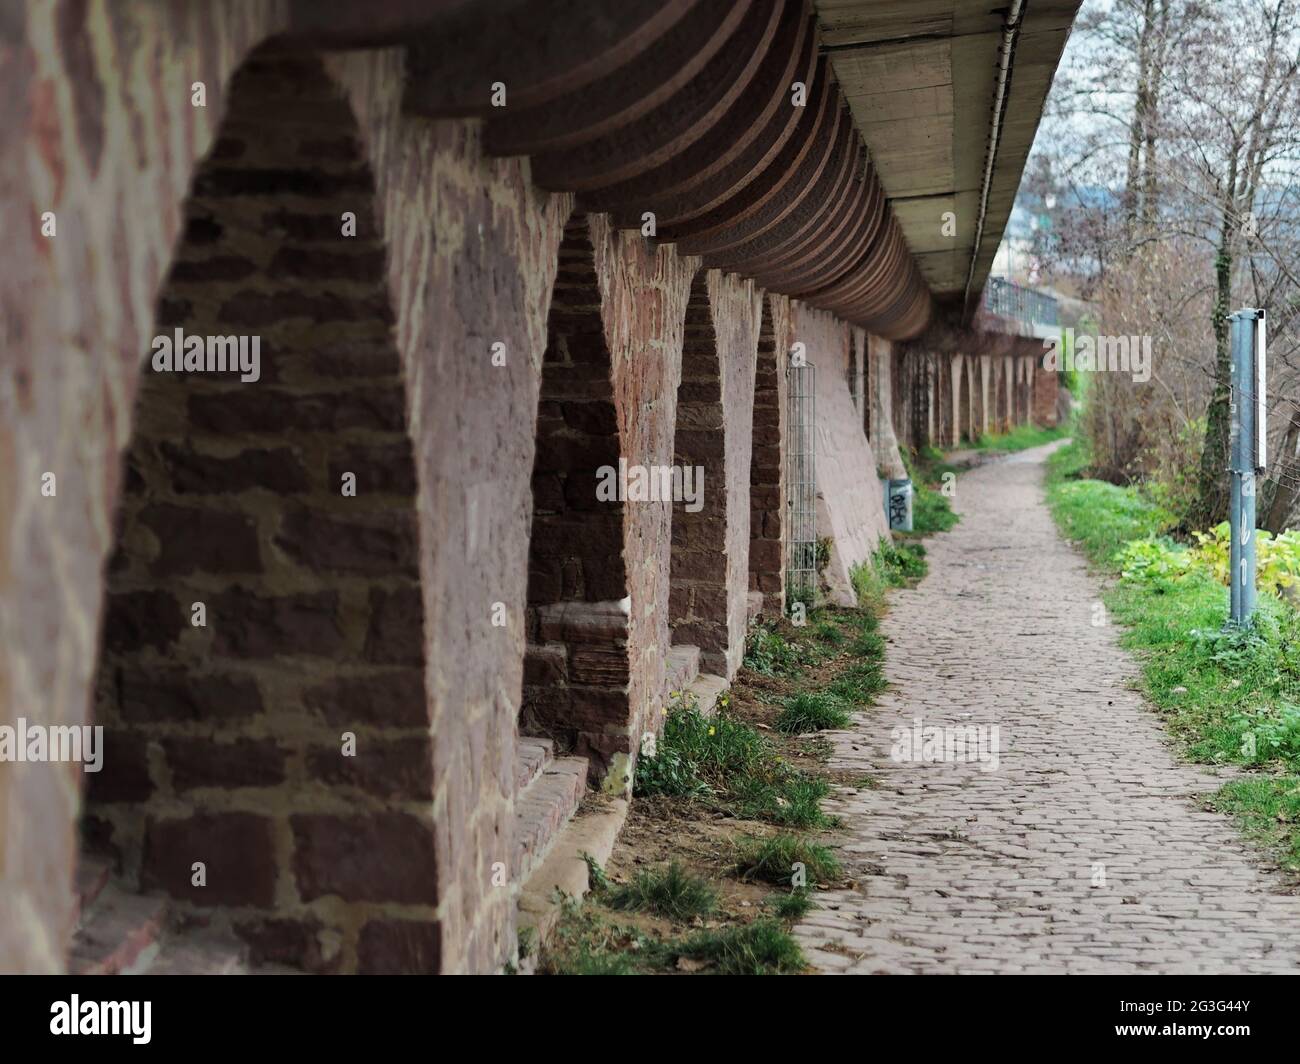 Arced stone wall by Leinpfad footpath at the northern bank of river Neckar in Heidelberg, Germany. Stock Photo